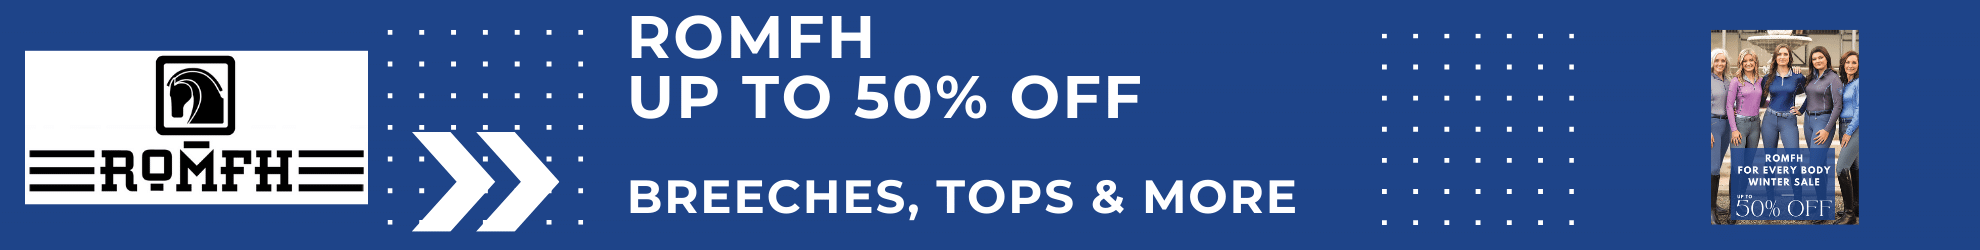 Romfh - Up to 50% Off